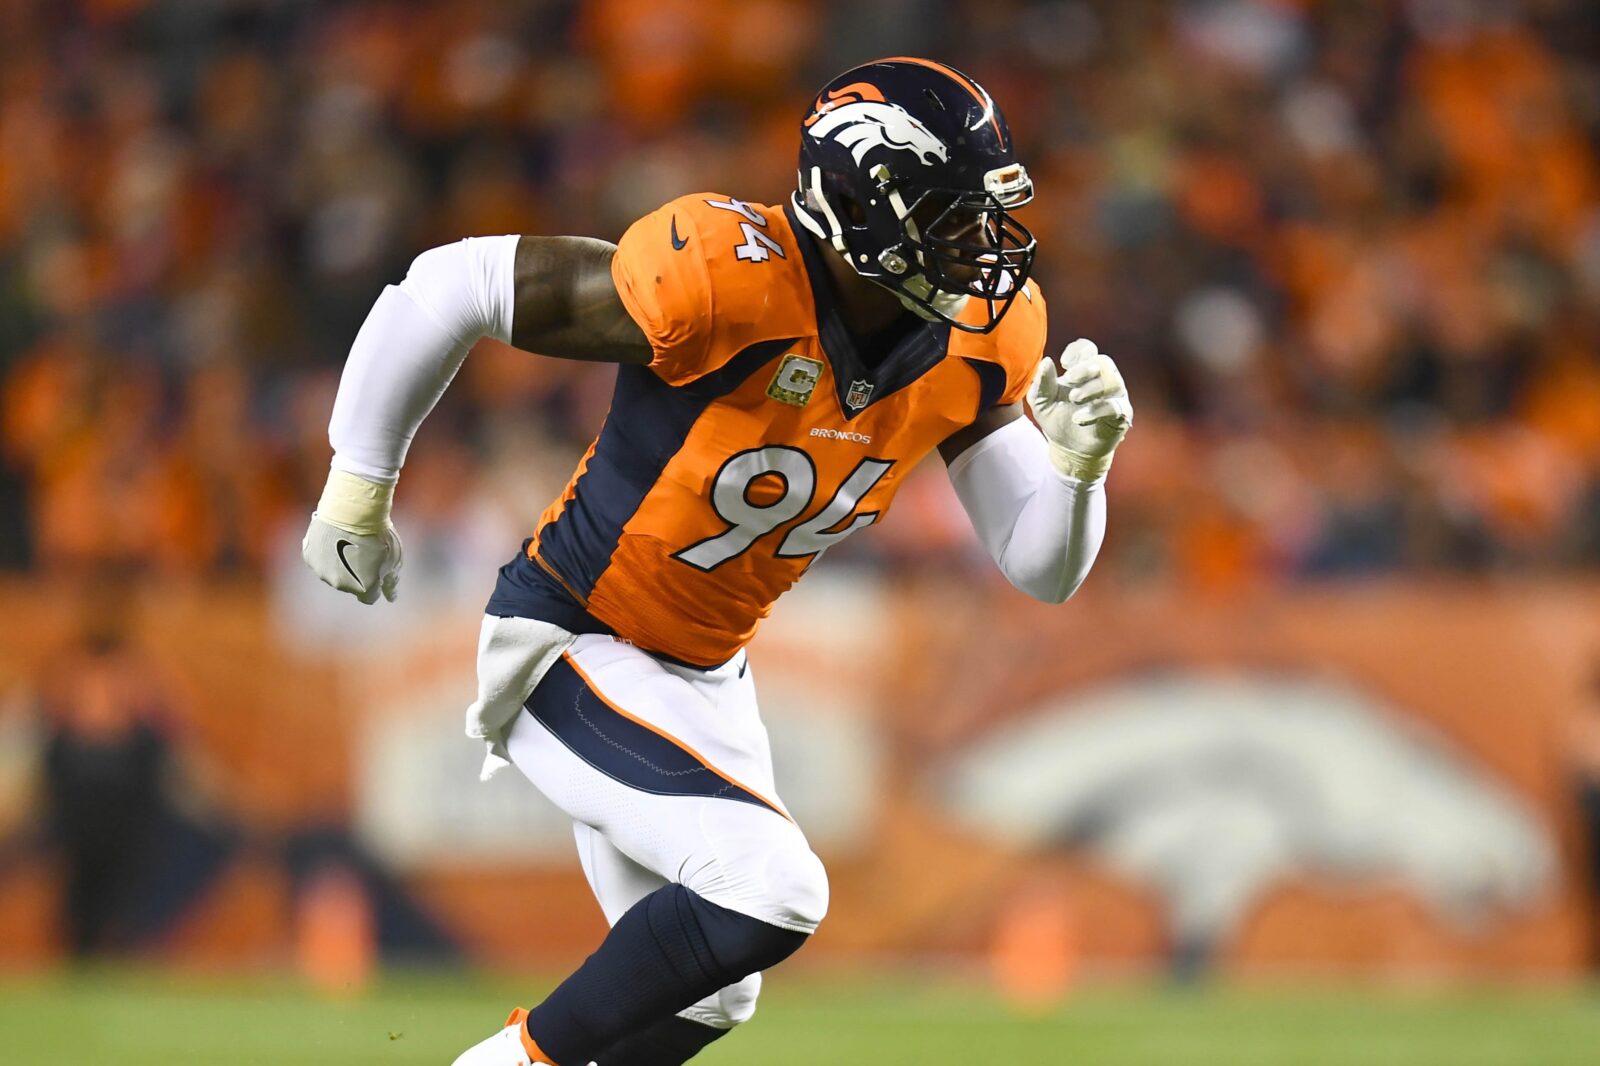 Super Bowl 50 champion Demarcus Ware named semifinalist for Pro